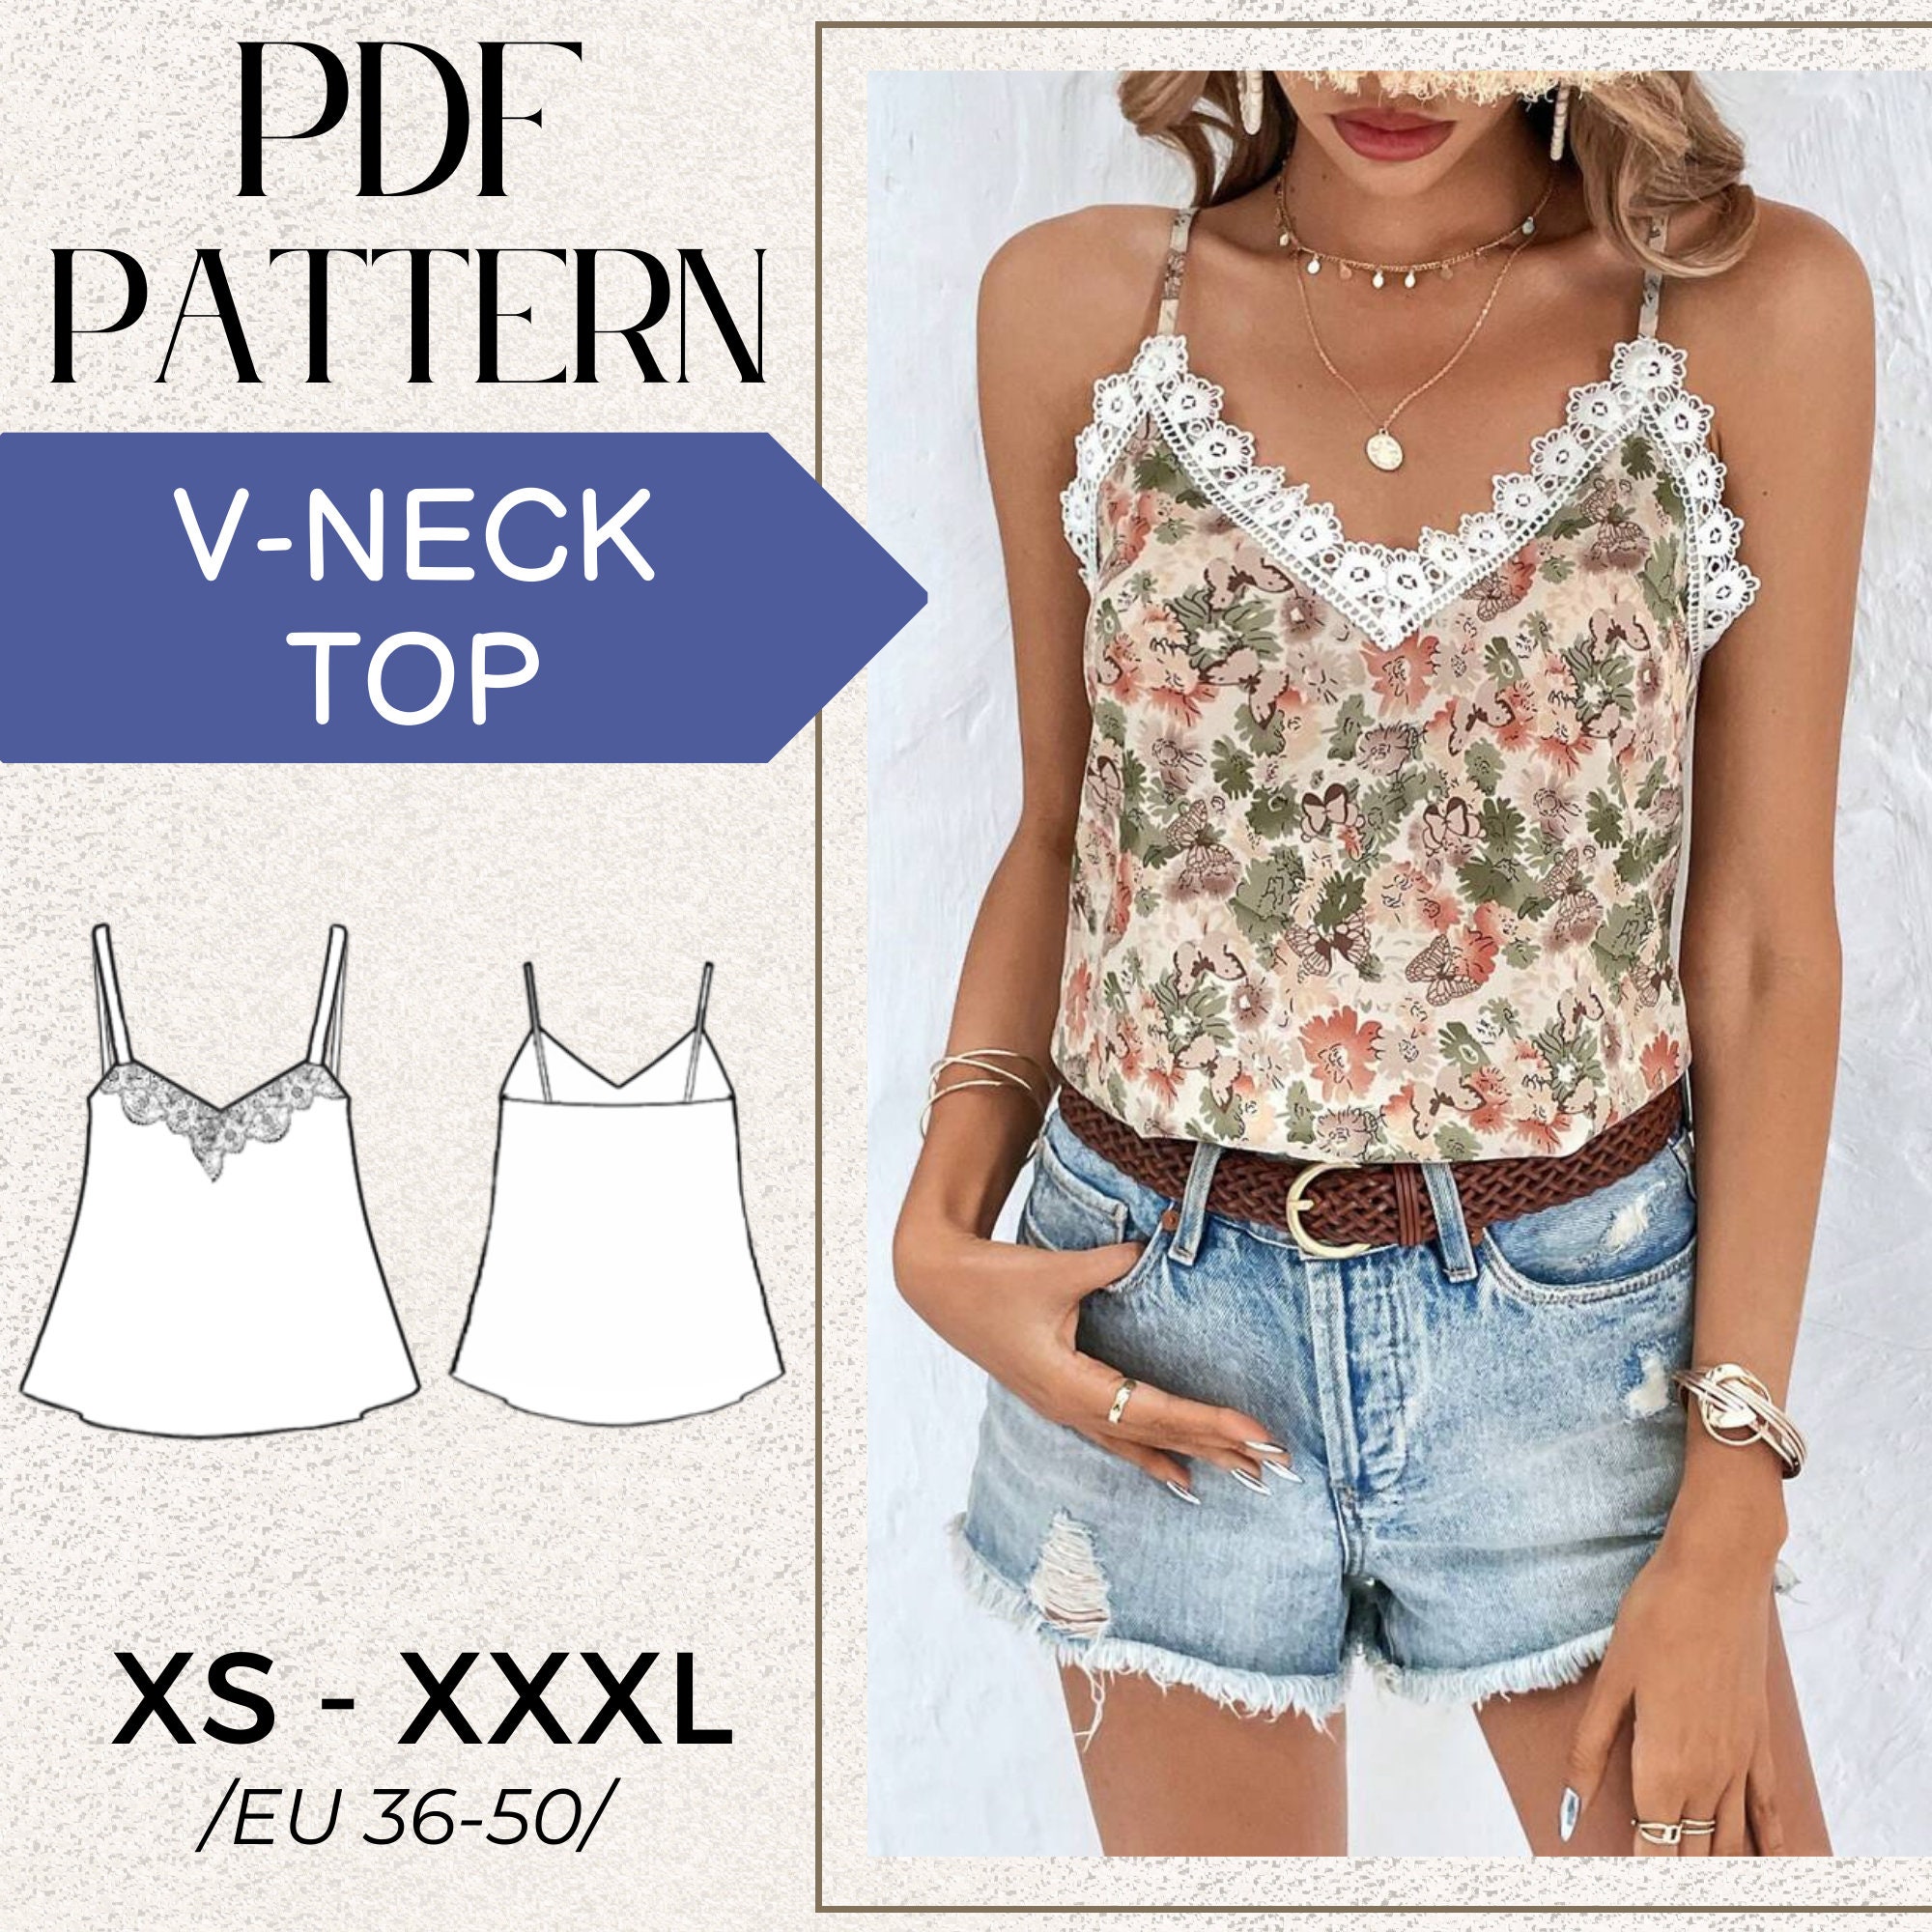 Scoop Neck Cami Top PDF Sewing Pattern Slip Shirt with